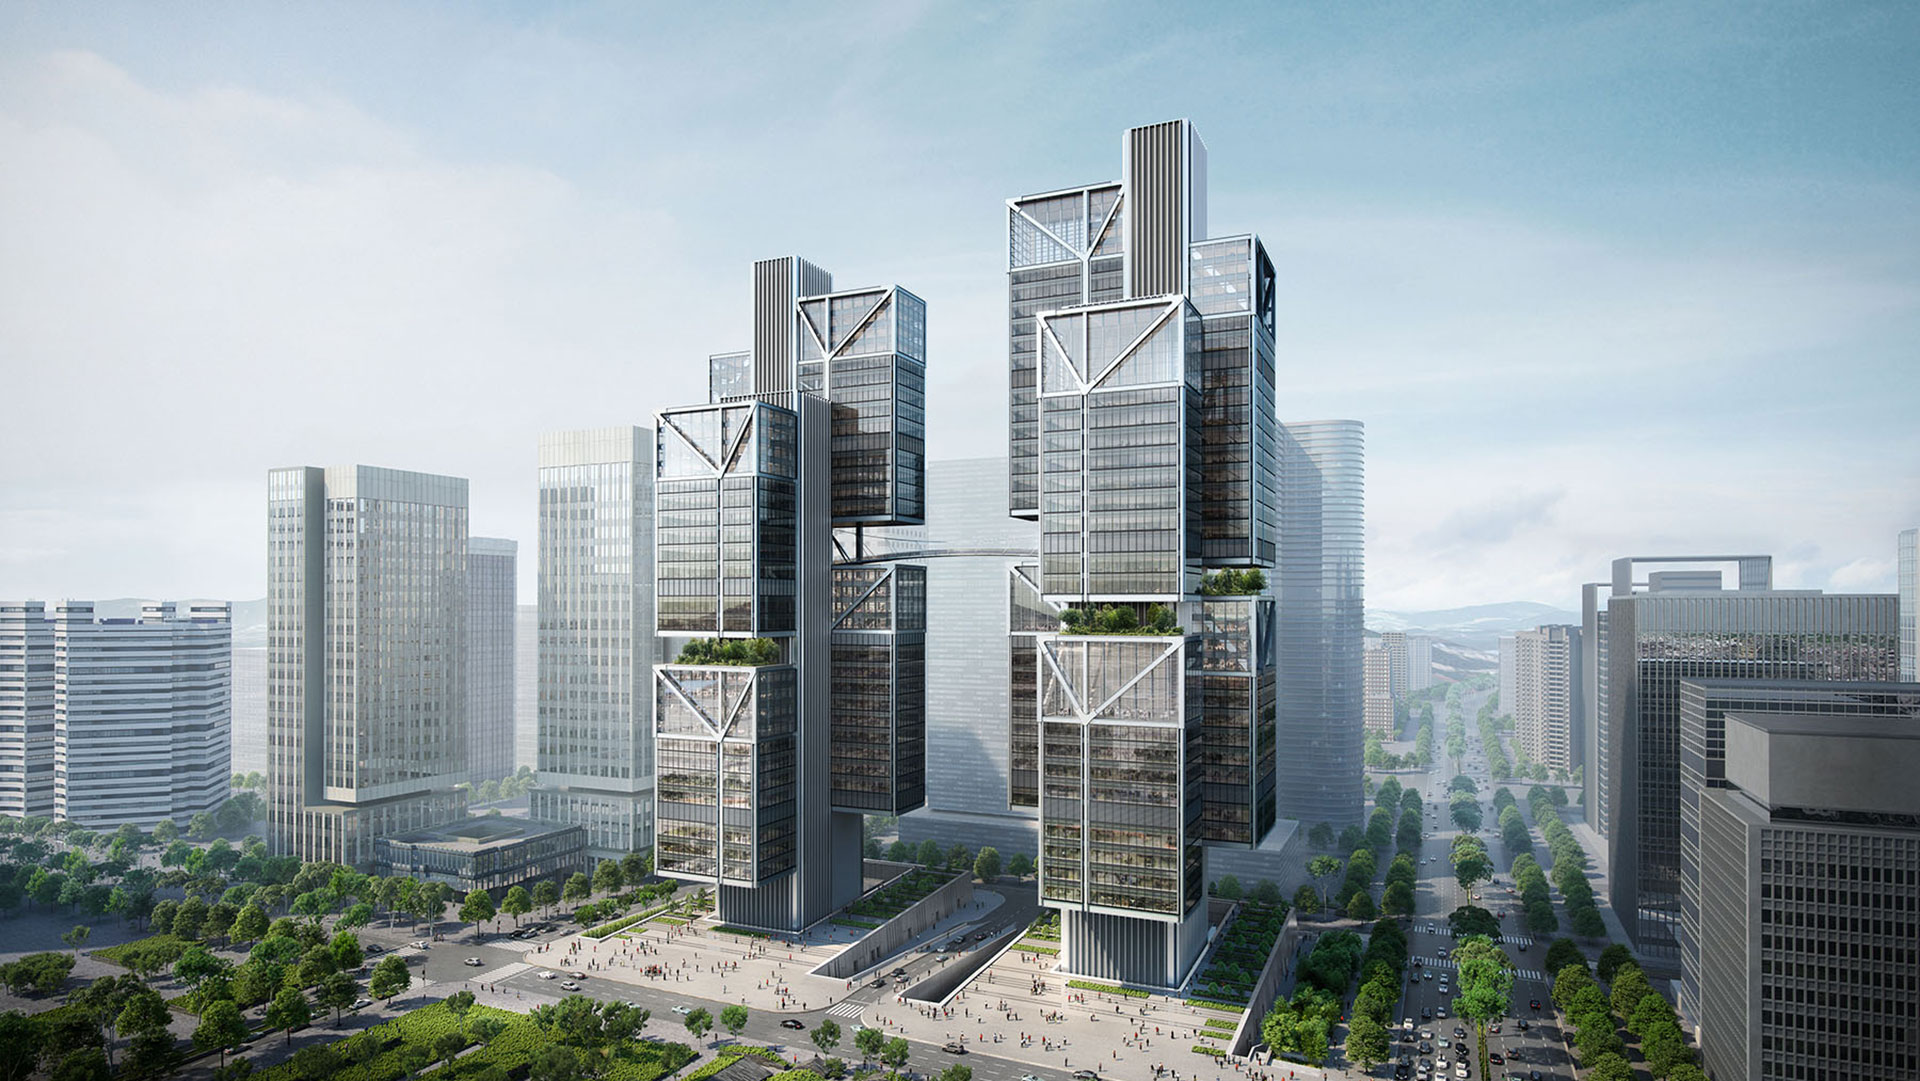 Two skyscrapers with suspended volumes, China